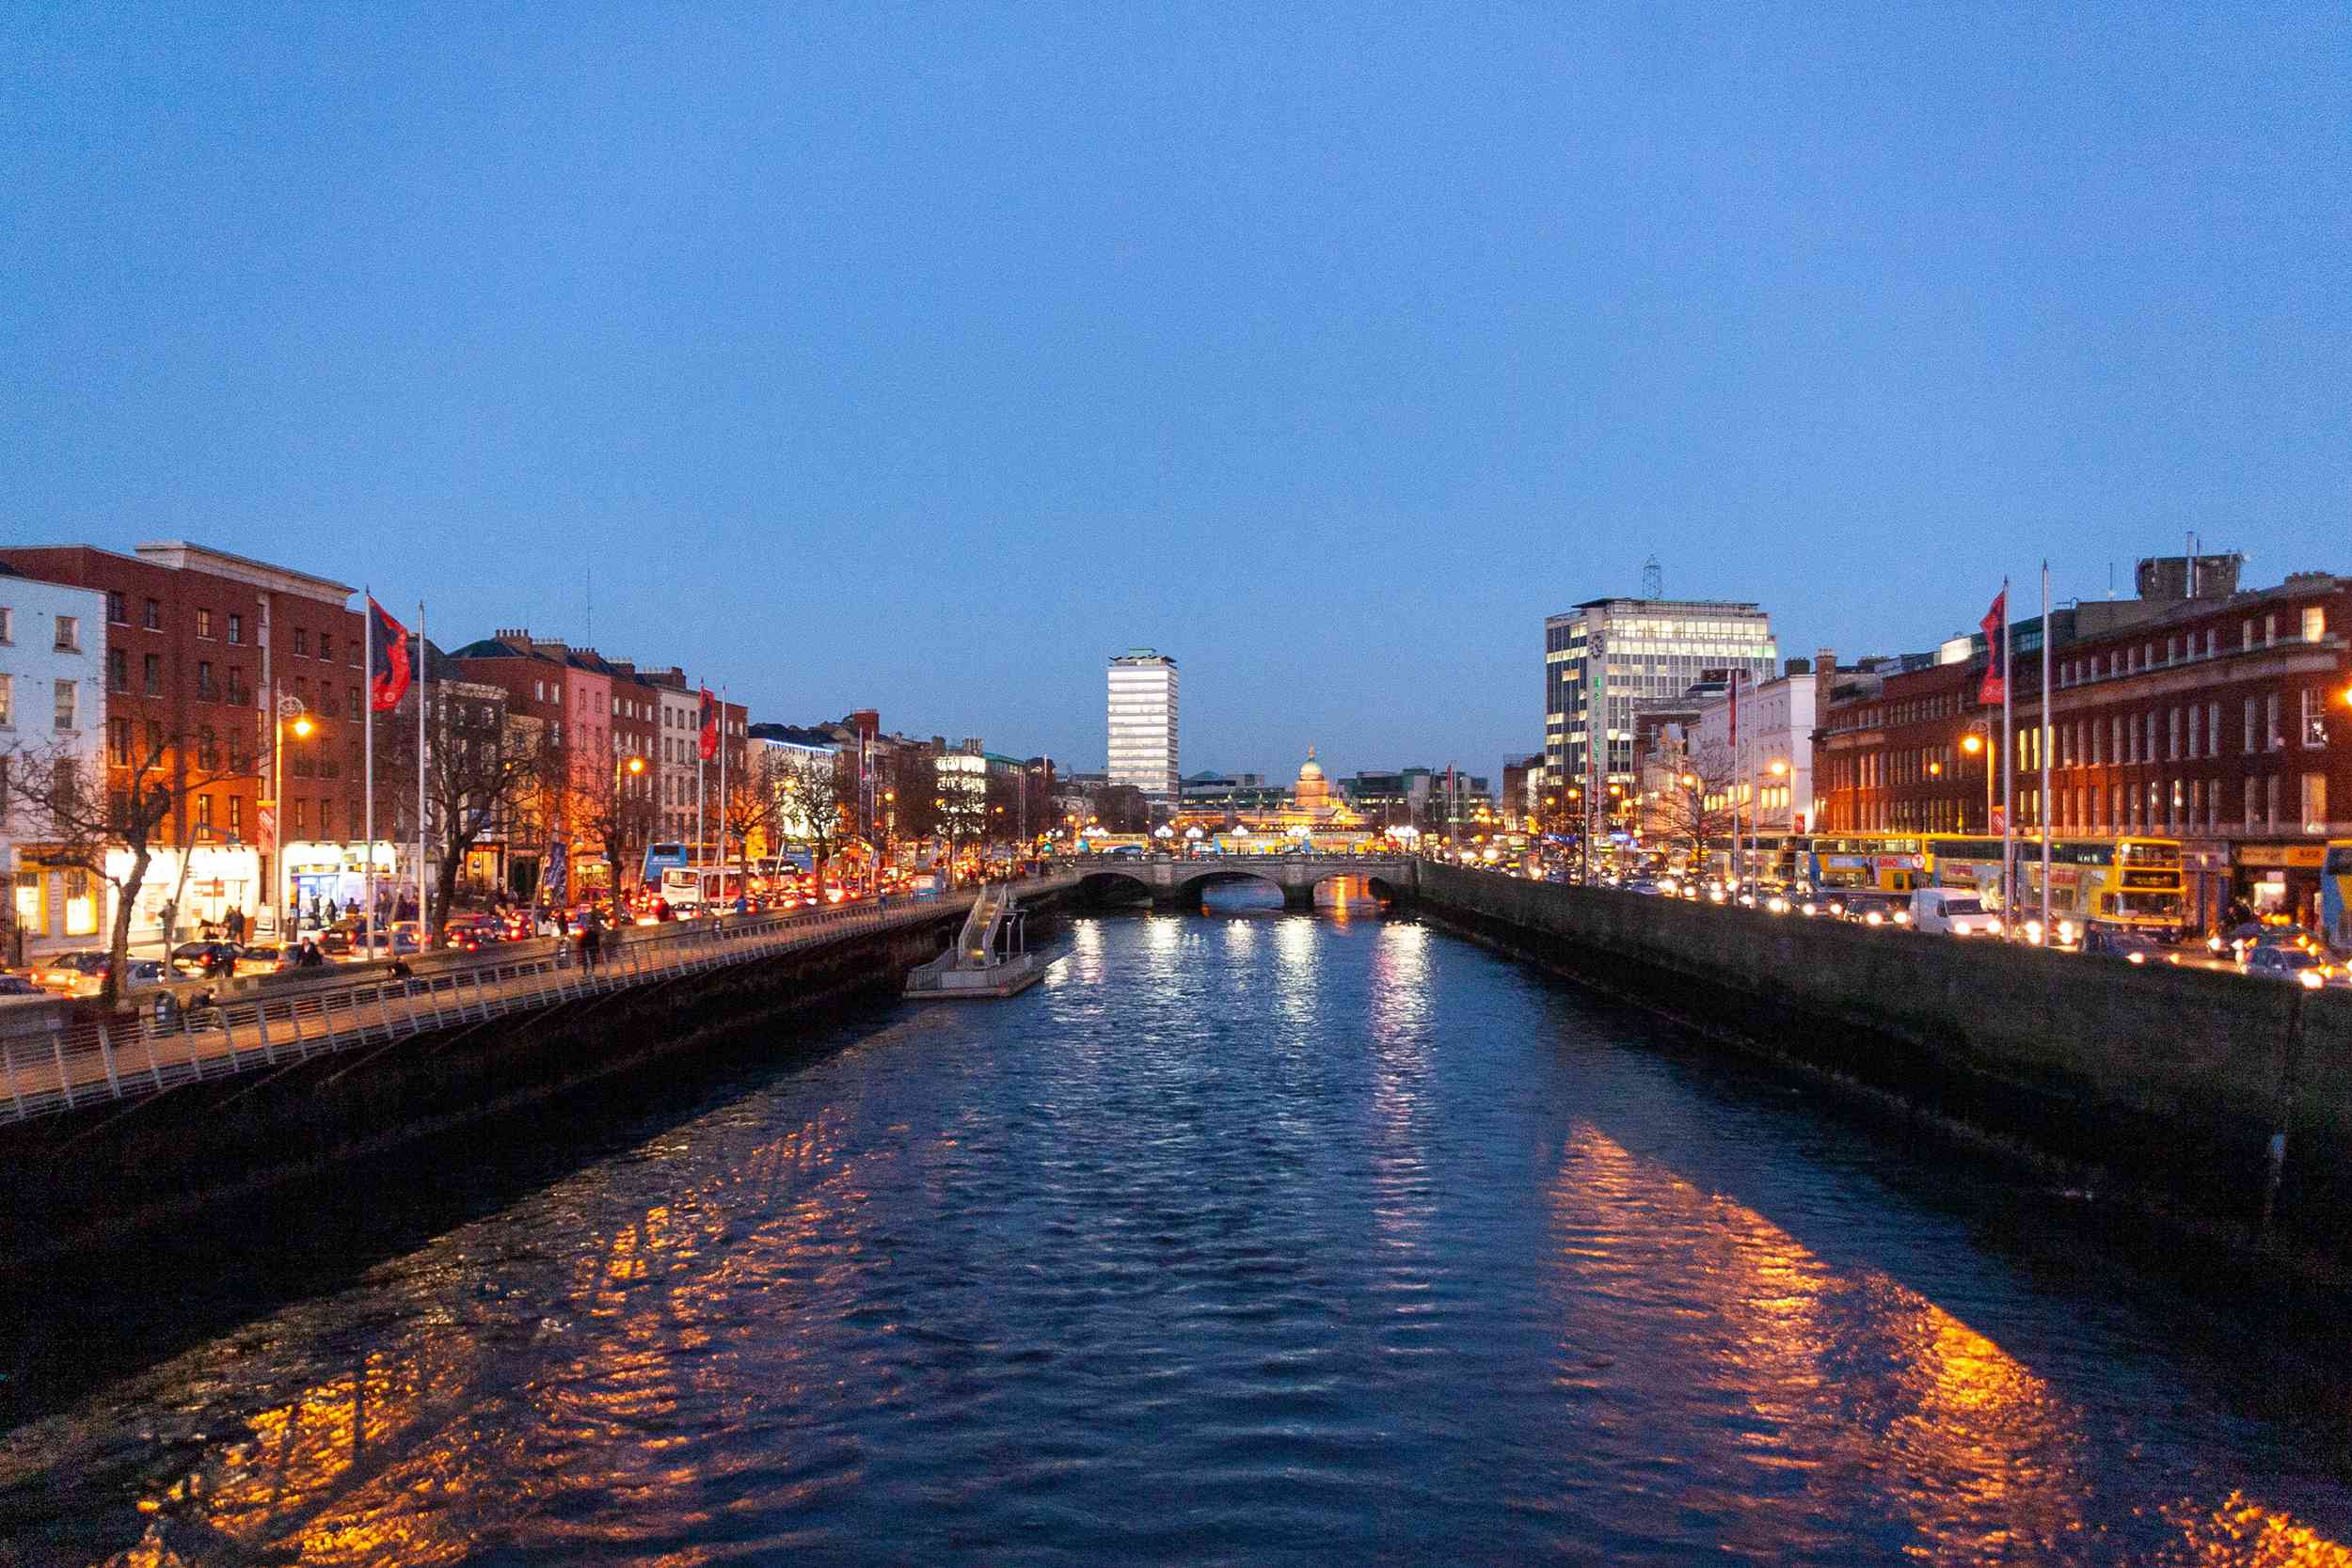 Is Dublin Tap Water Safe To Drink? Tap water & safety quality